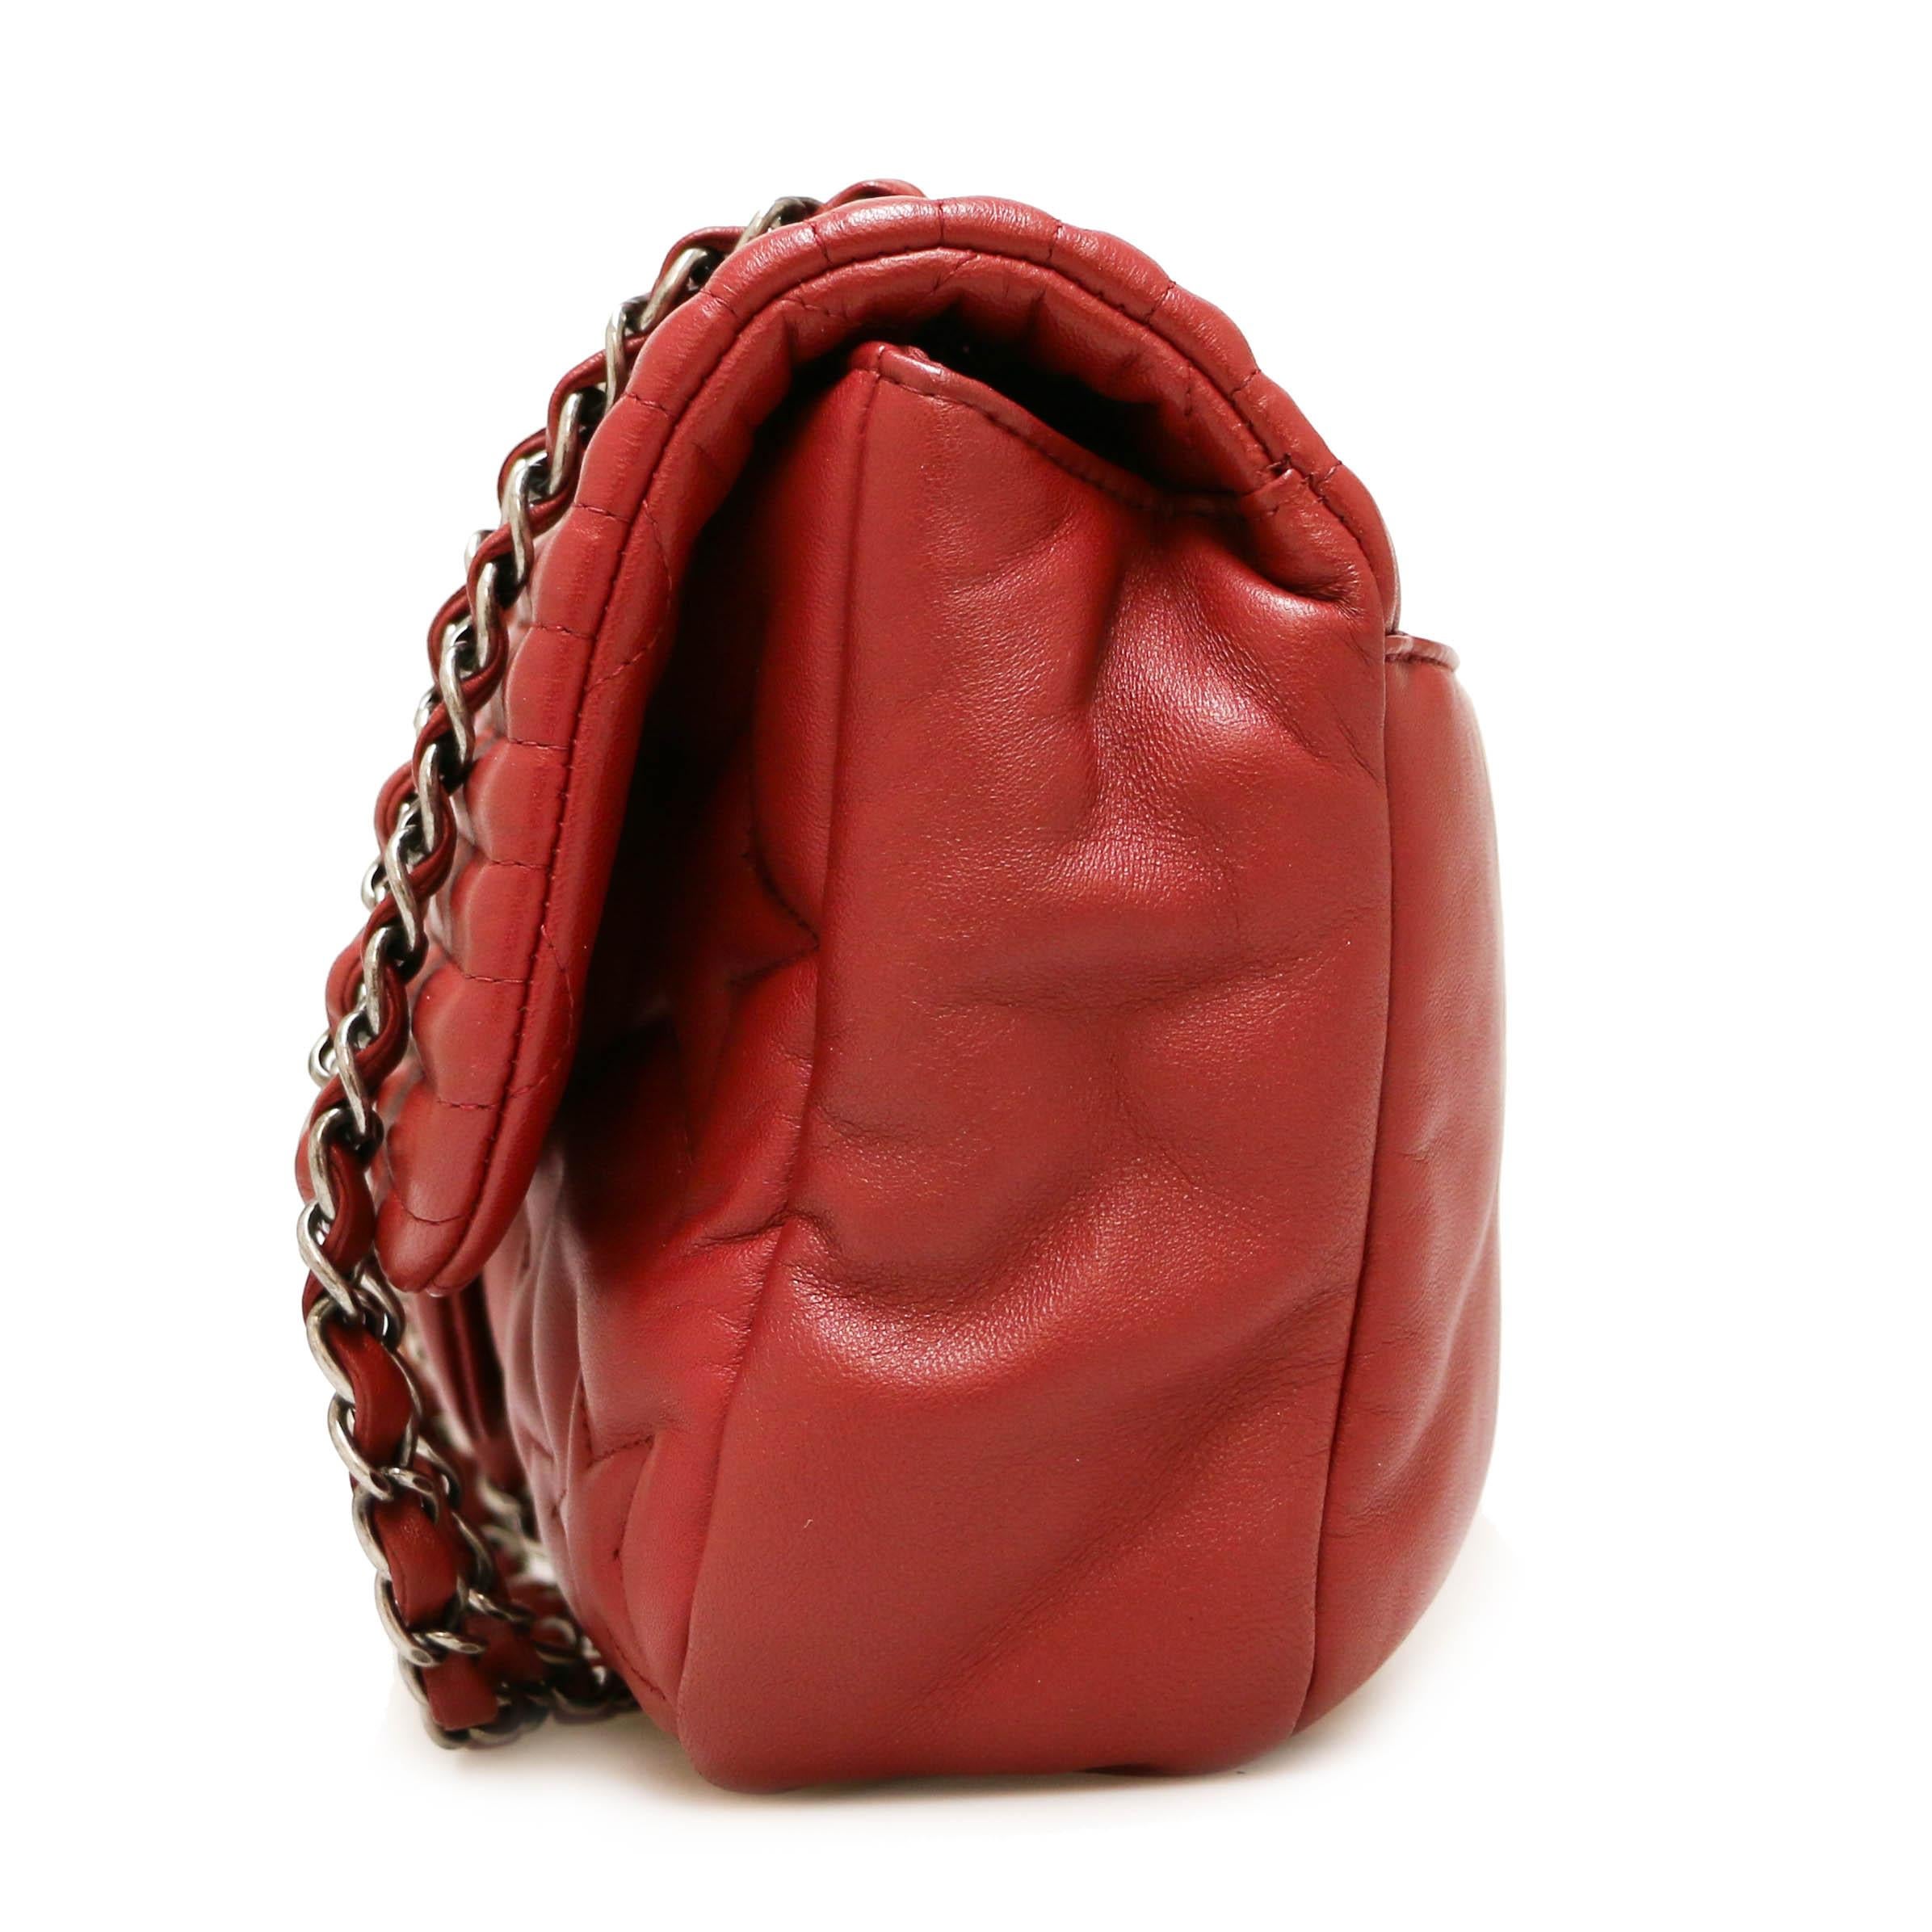 Red Chanel Jumbo Bag From Paris-Dallas Metiers D'Art Collection For Sale